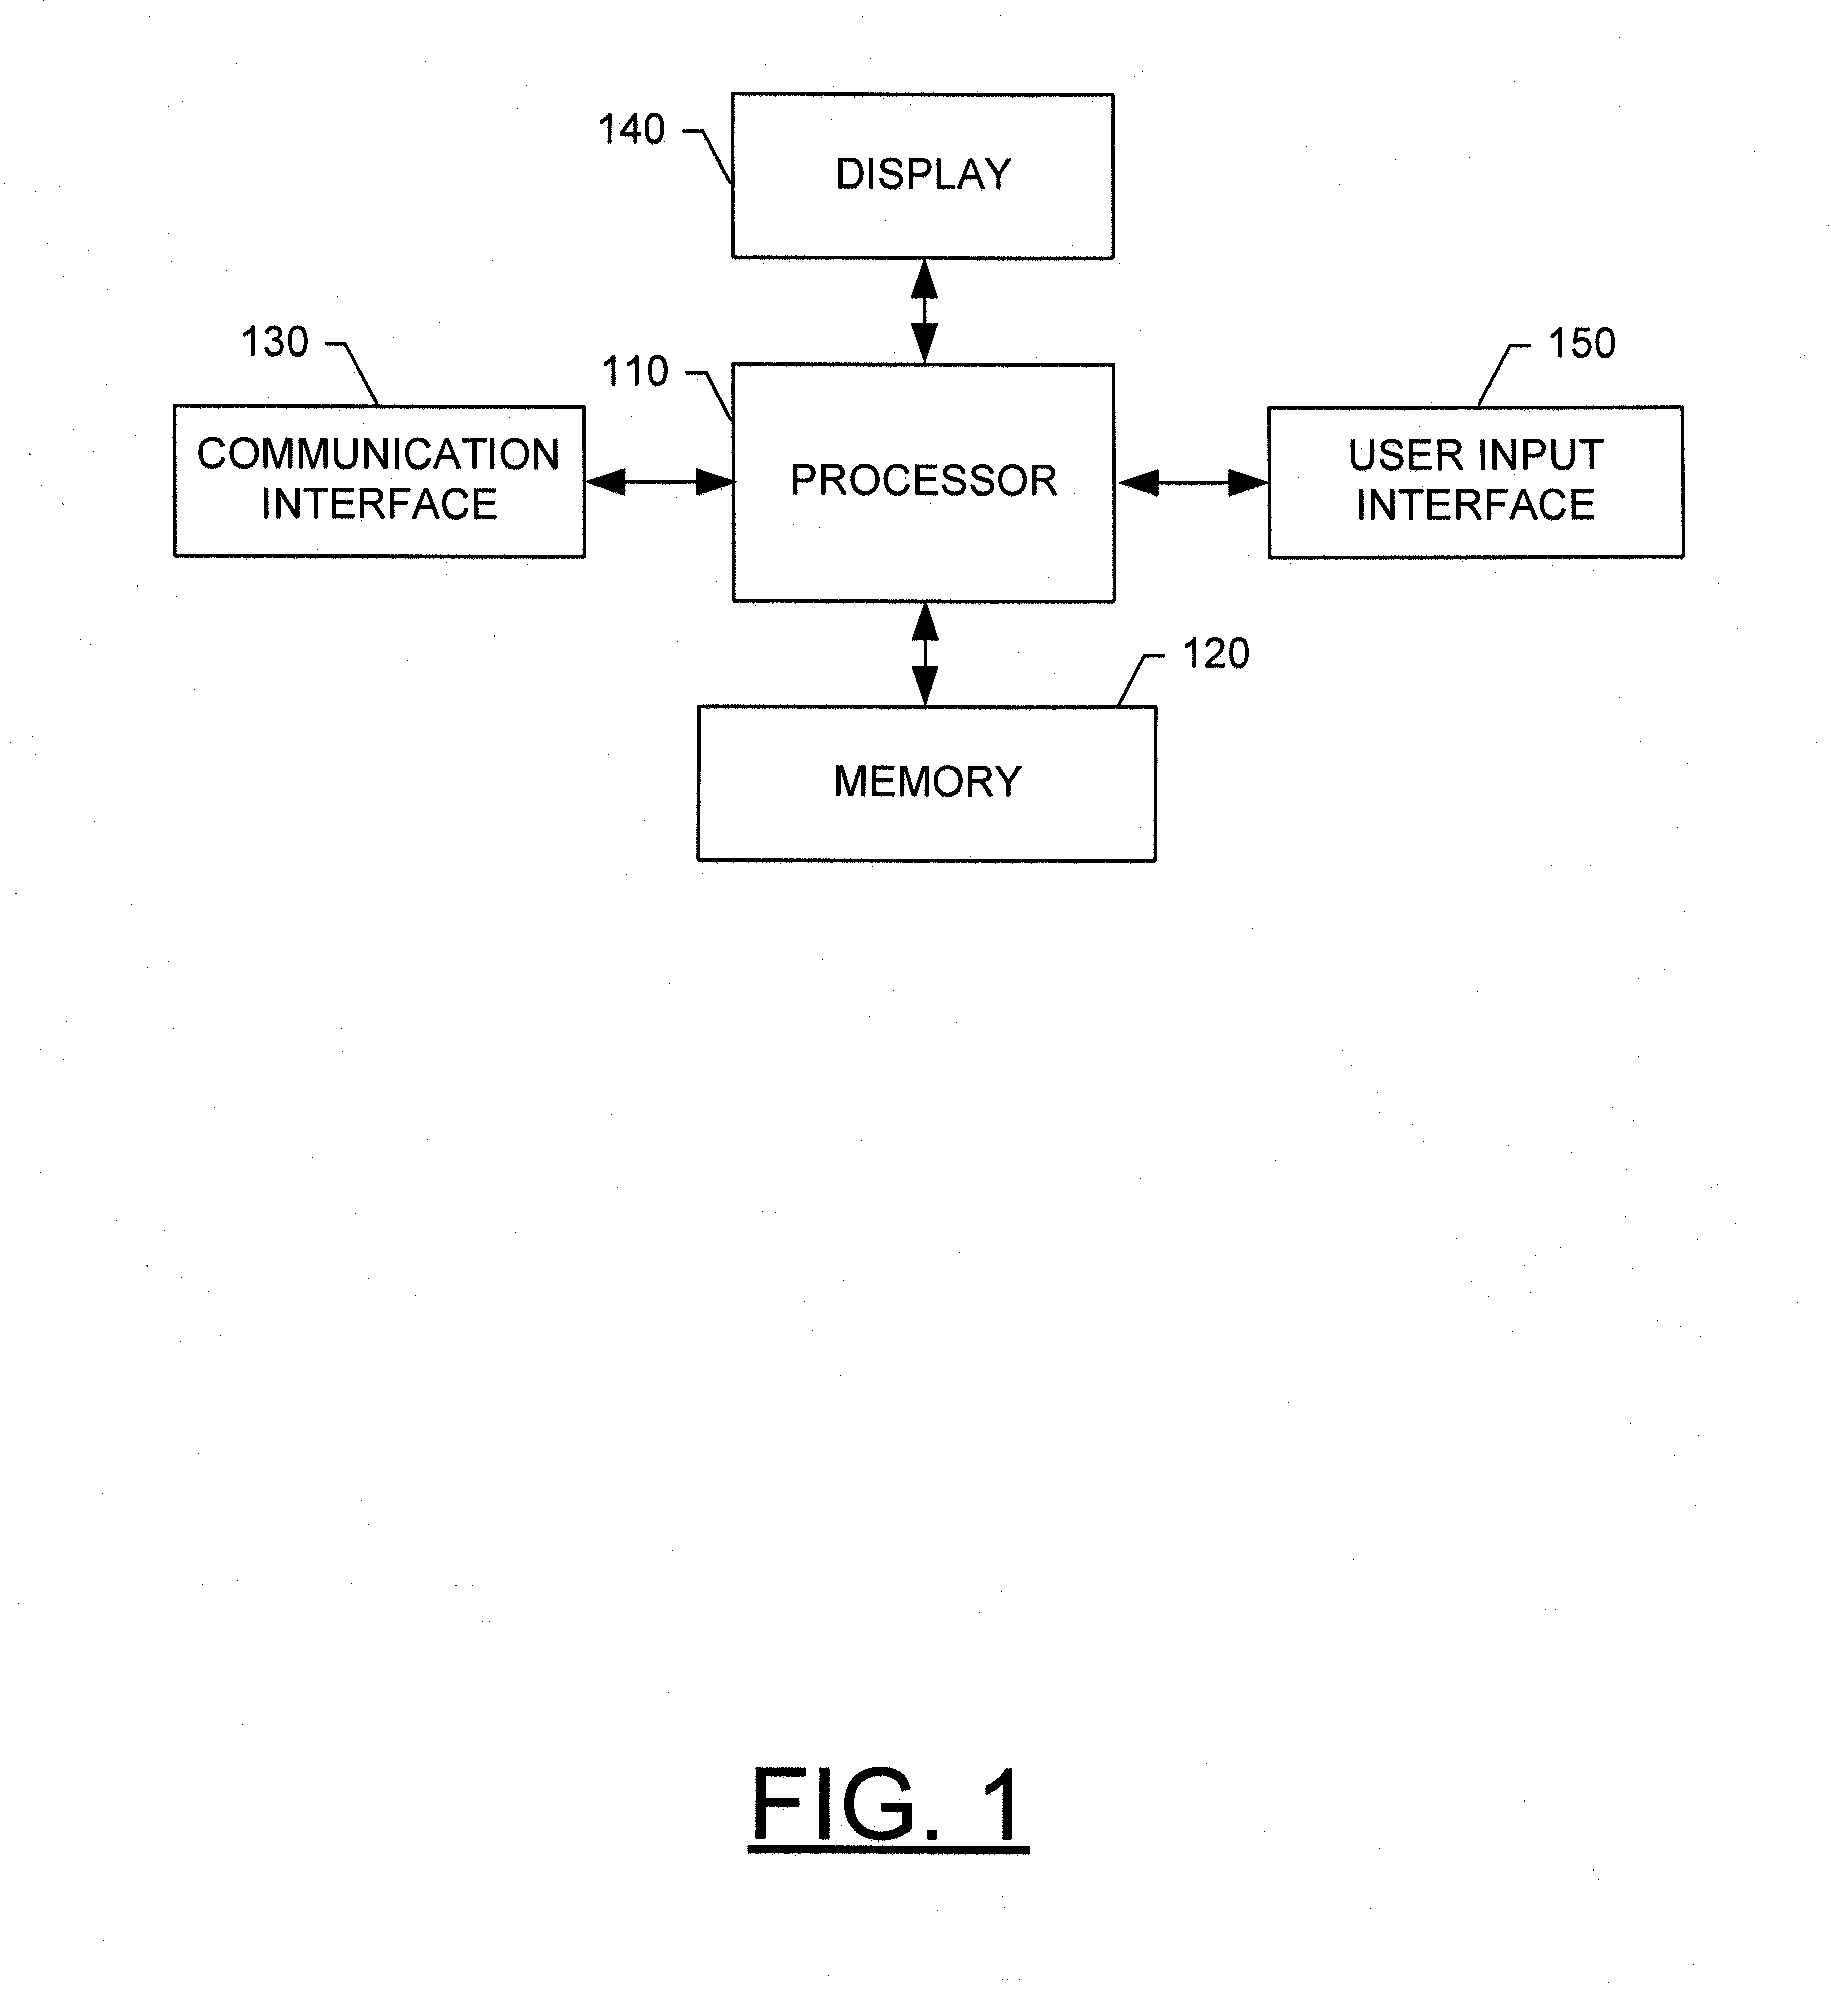 Apparatus, method and computer program product for manipulating a device using dual side input devices